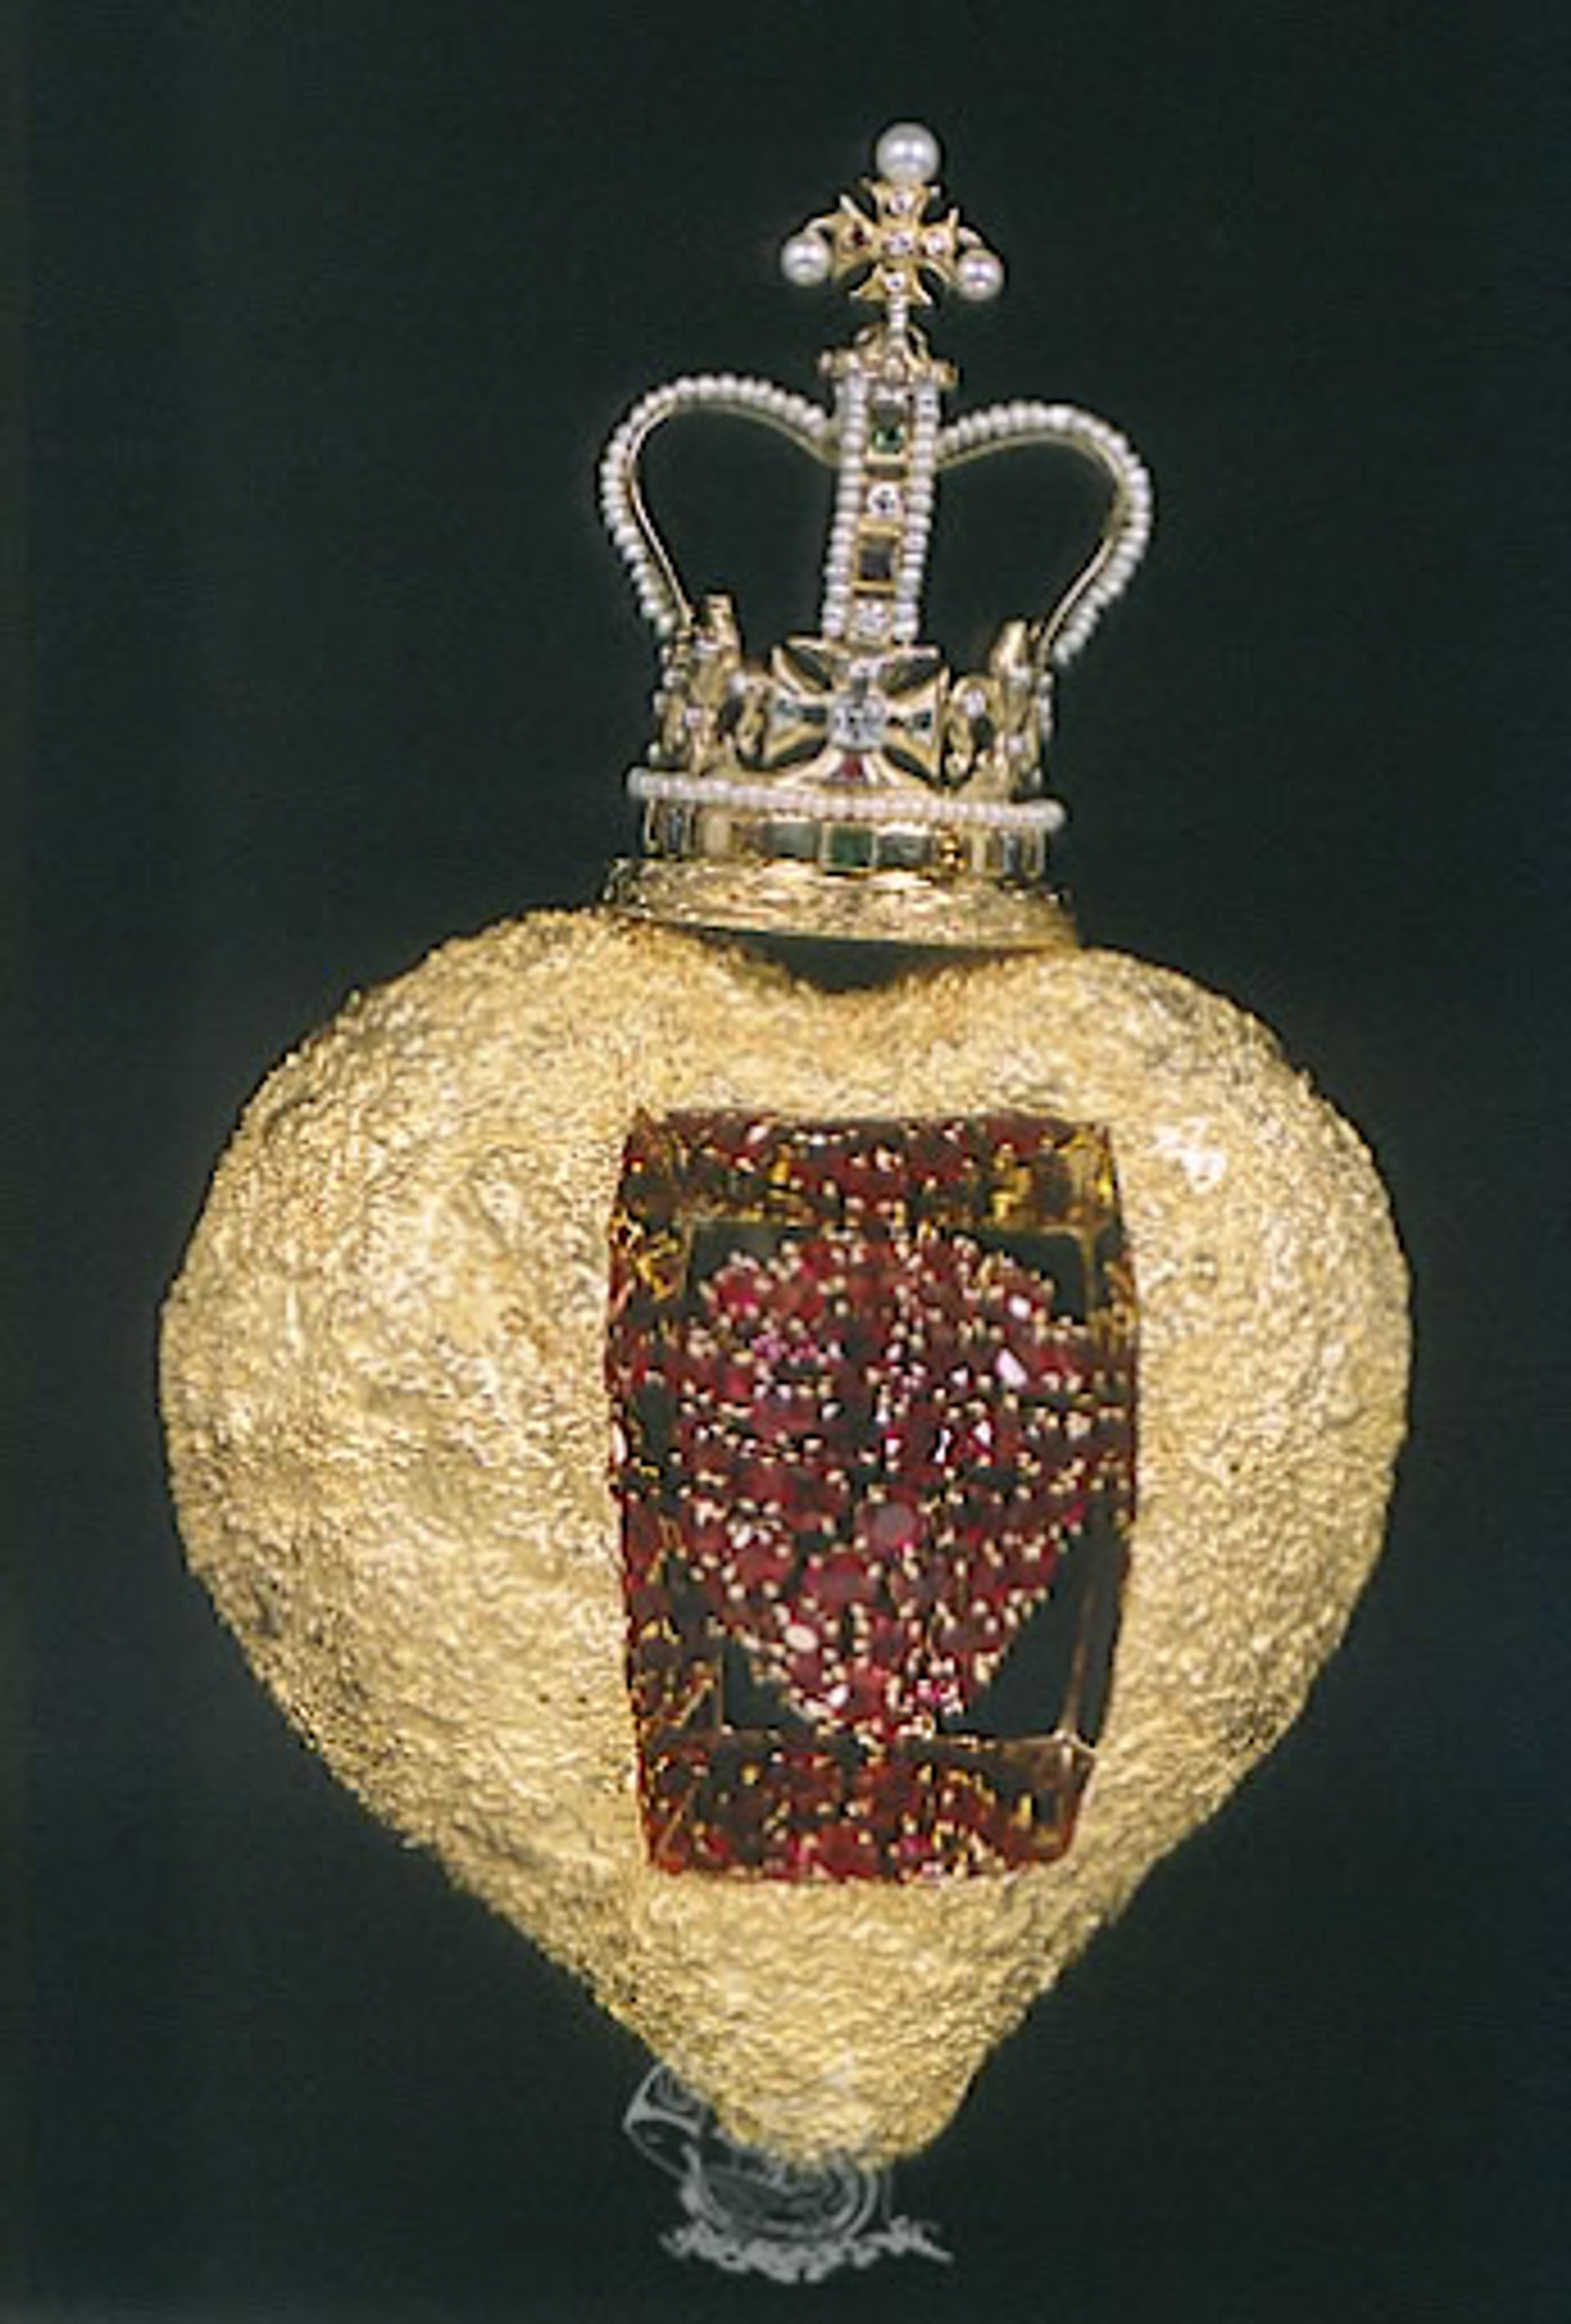 Salvador Dalí’s The Royal Heart. A gold heart with a crown on top and a collection of red gemstones in the centre.